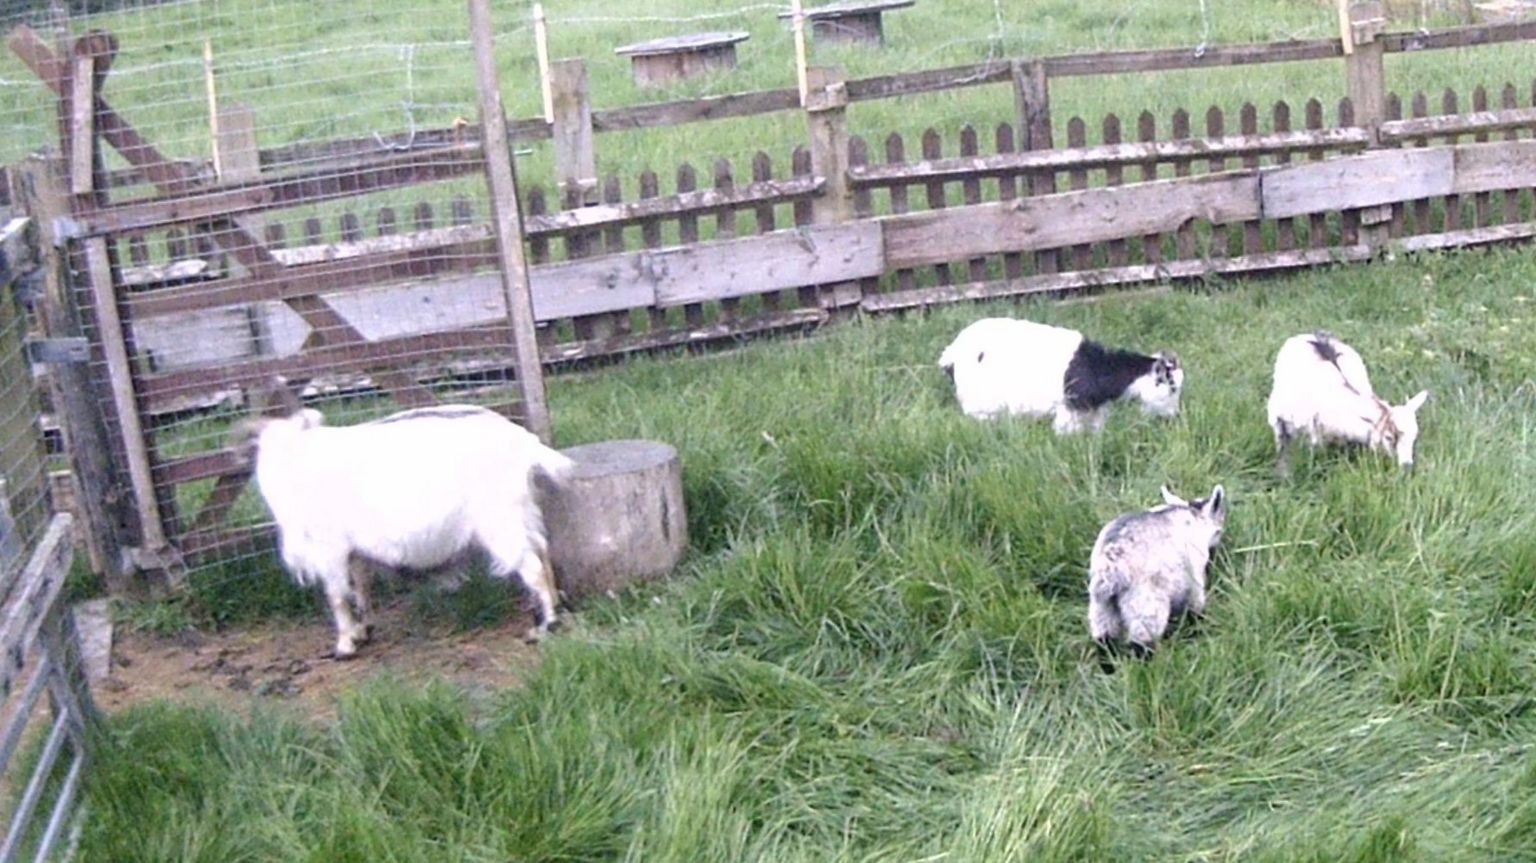 The goats in a paddock